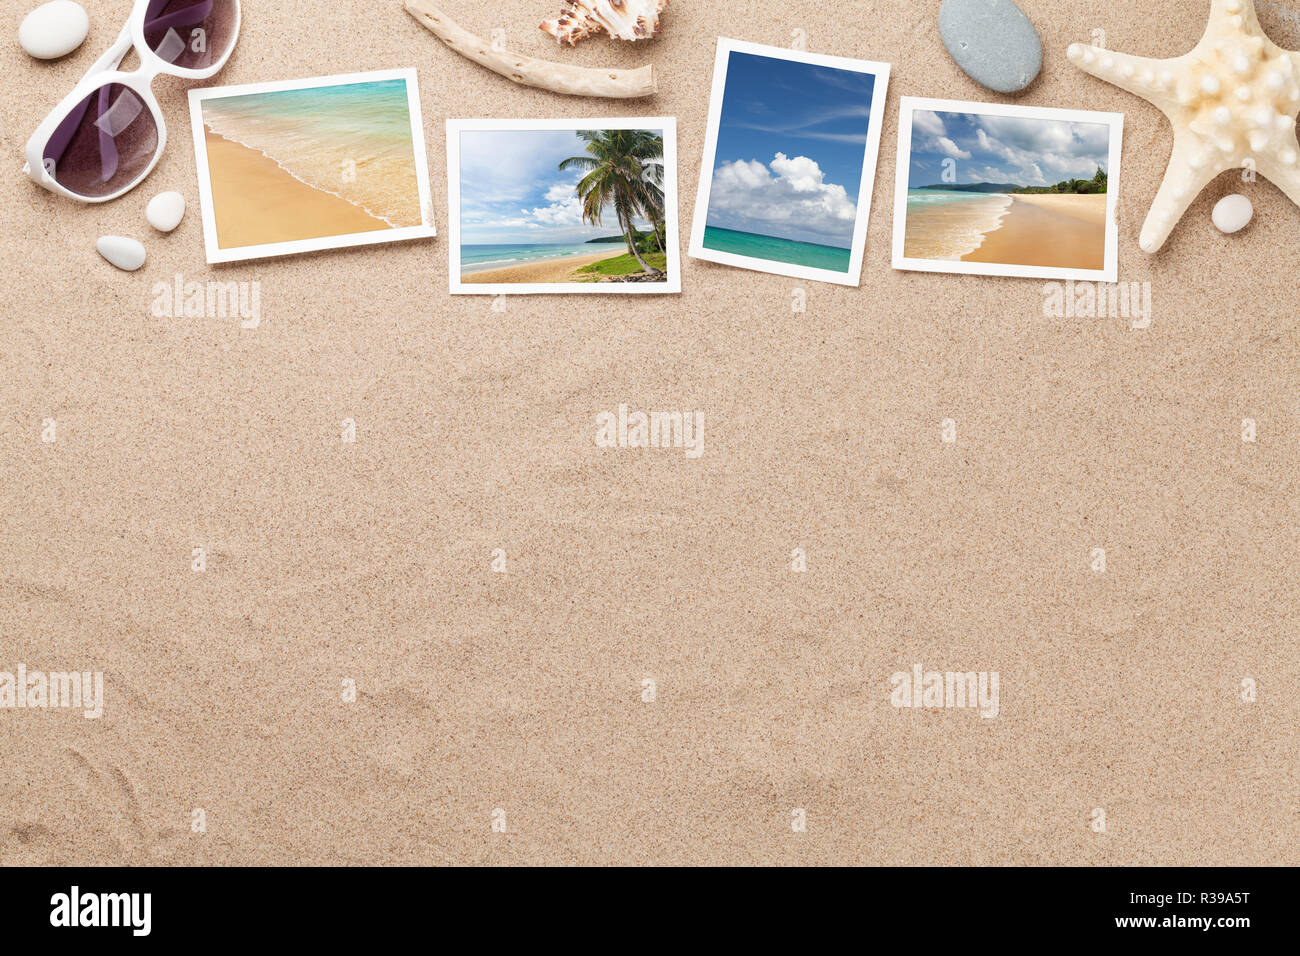 Travel vacation background concept with sunglasses, seashells and photos on sand backdrop. Top view with copy space. Flat lay. All photos taken by me Stock Photo